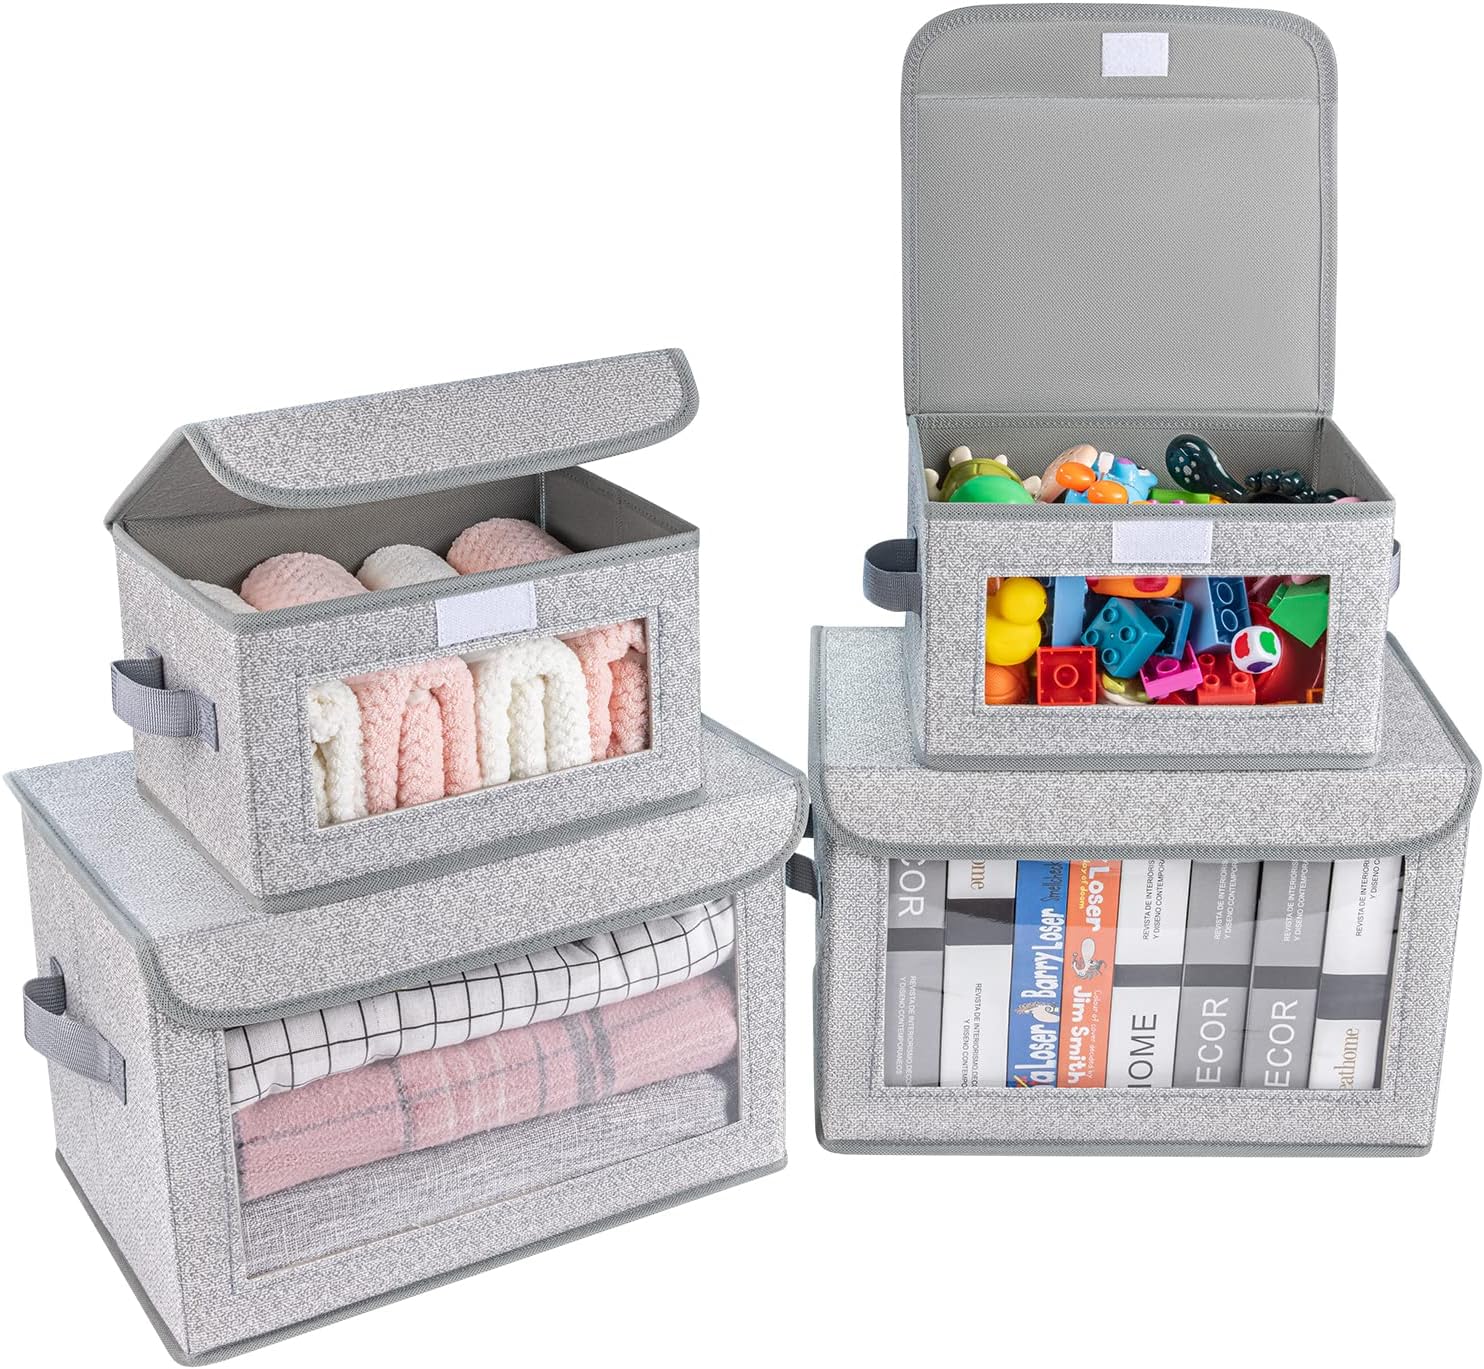 Blushbees® 4-Pack Storage Bins with Handles and Lids - Light Grey